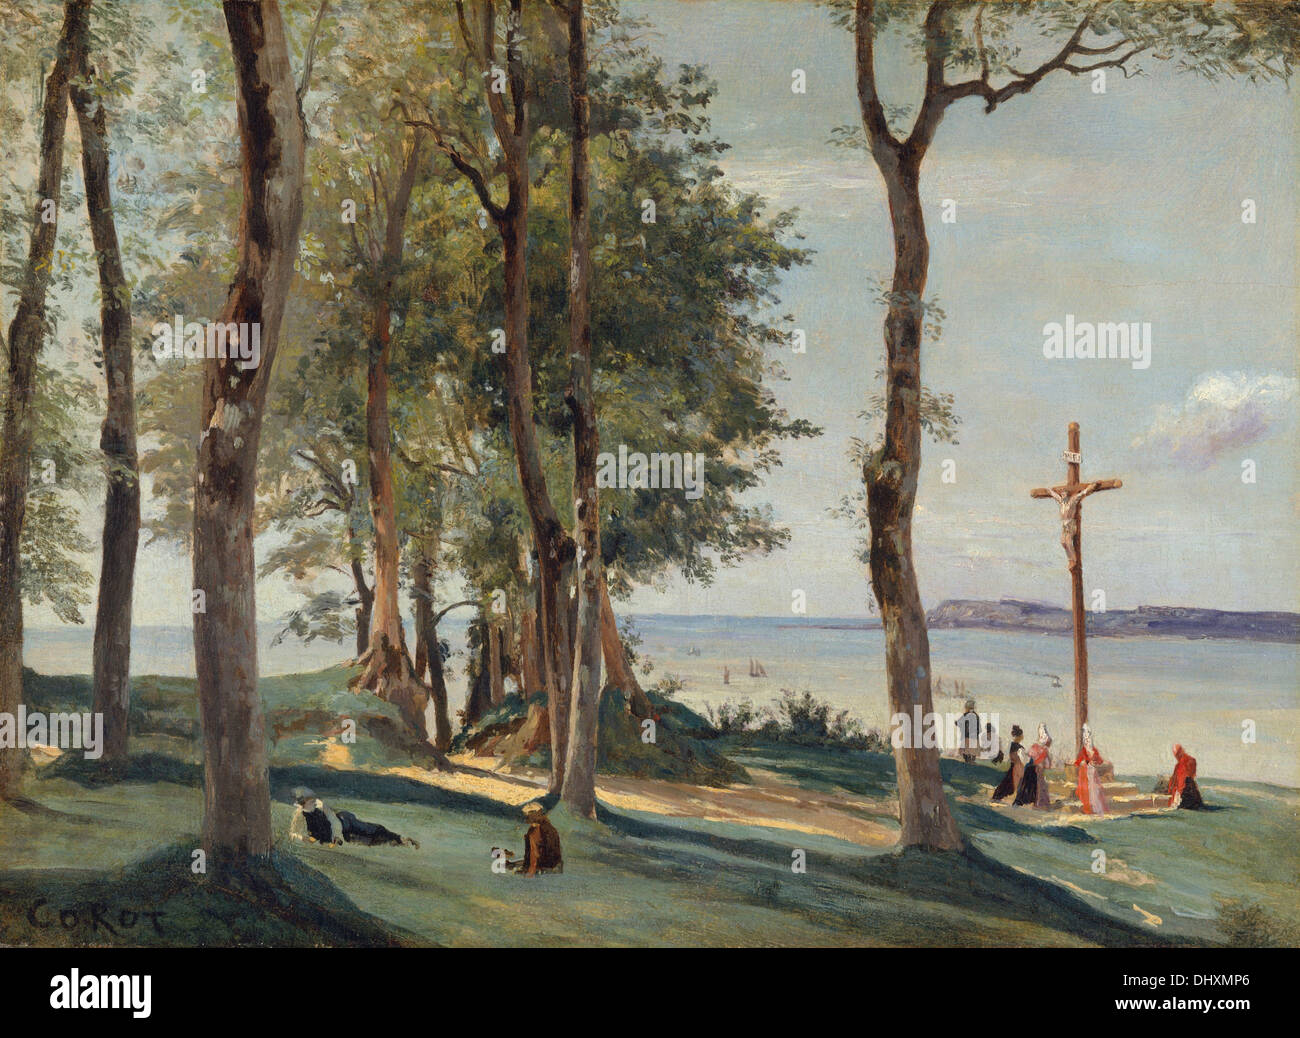 Honfleur: Calvary - by Camille Corot, 1830 Stock Photo